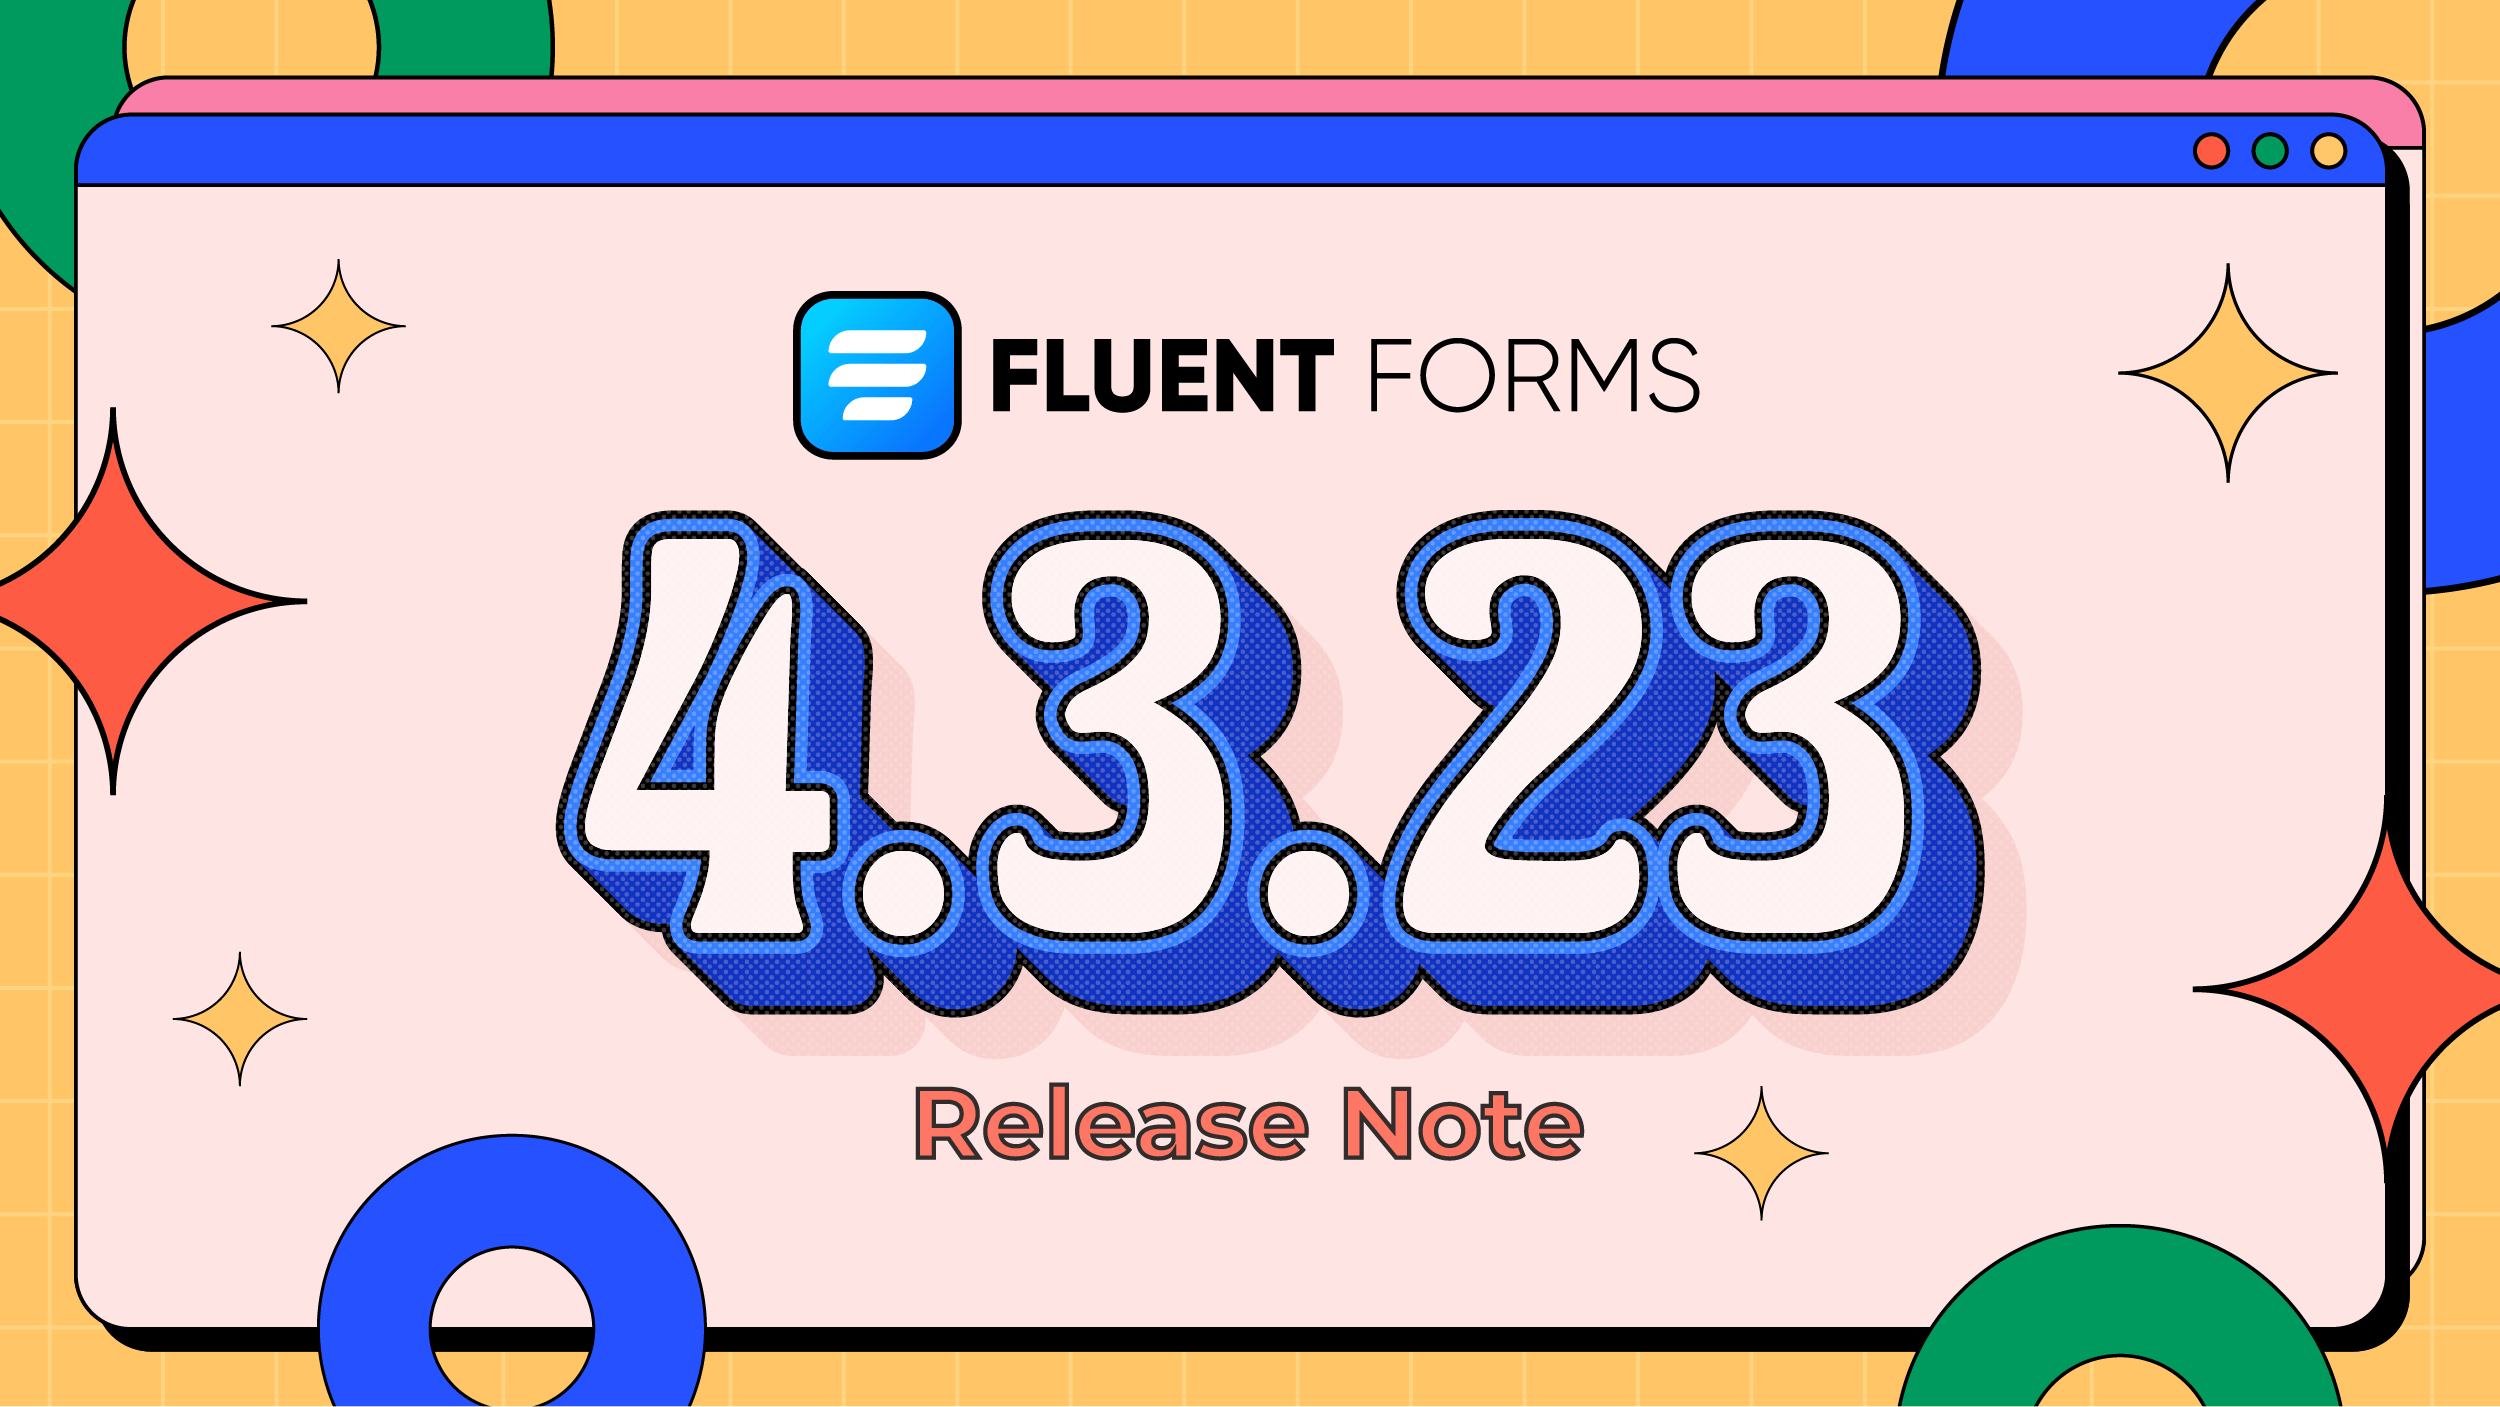 Release Note 4.3.23